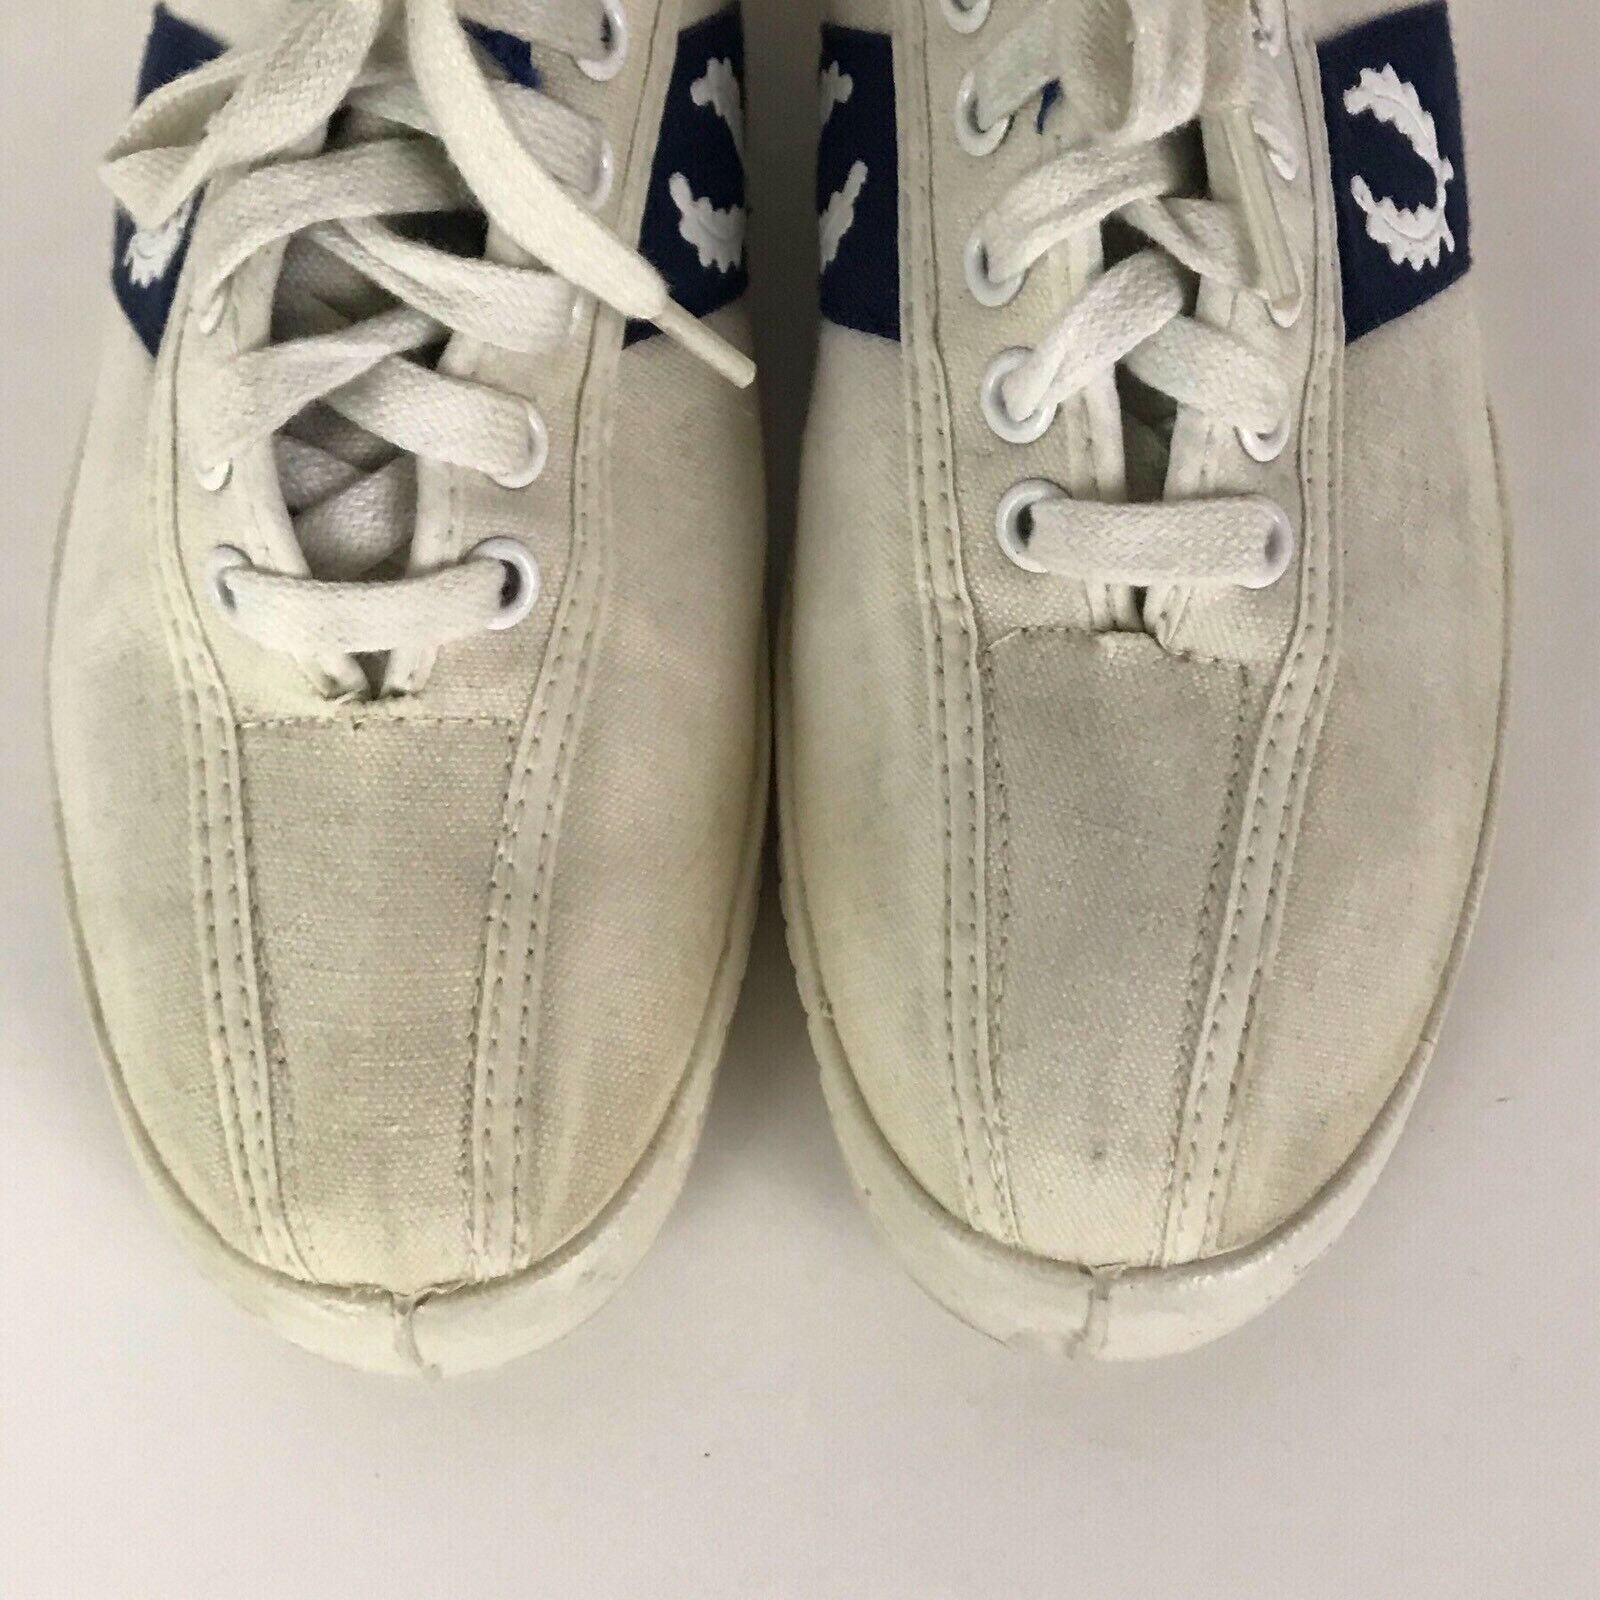 RARE Vintage 1980s Fred Perry Etonic White & Blue Canvas Tennis Shoes ...